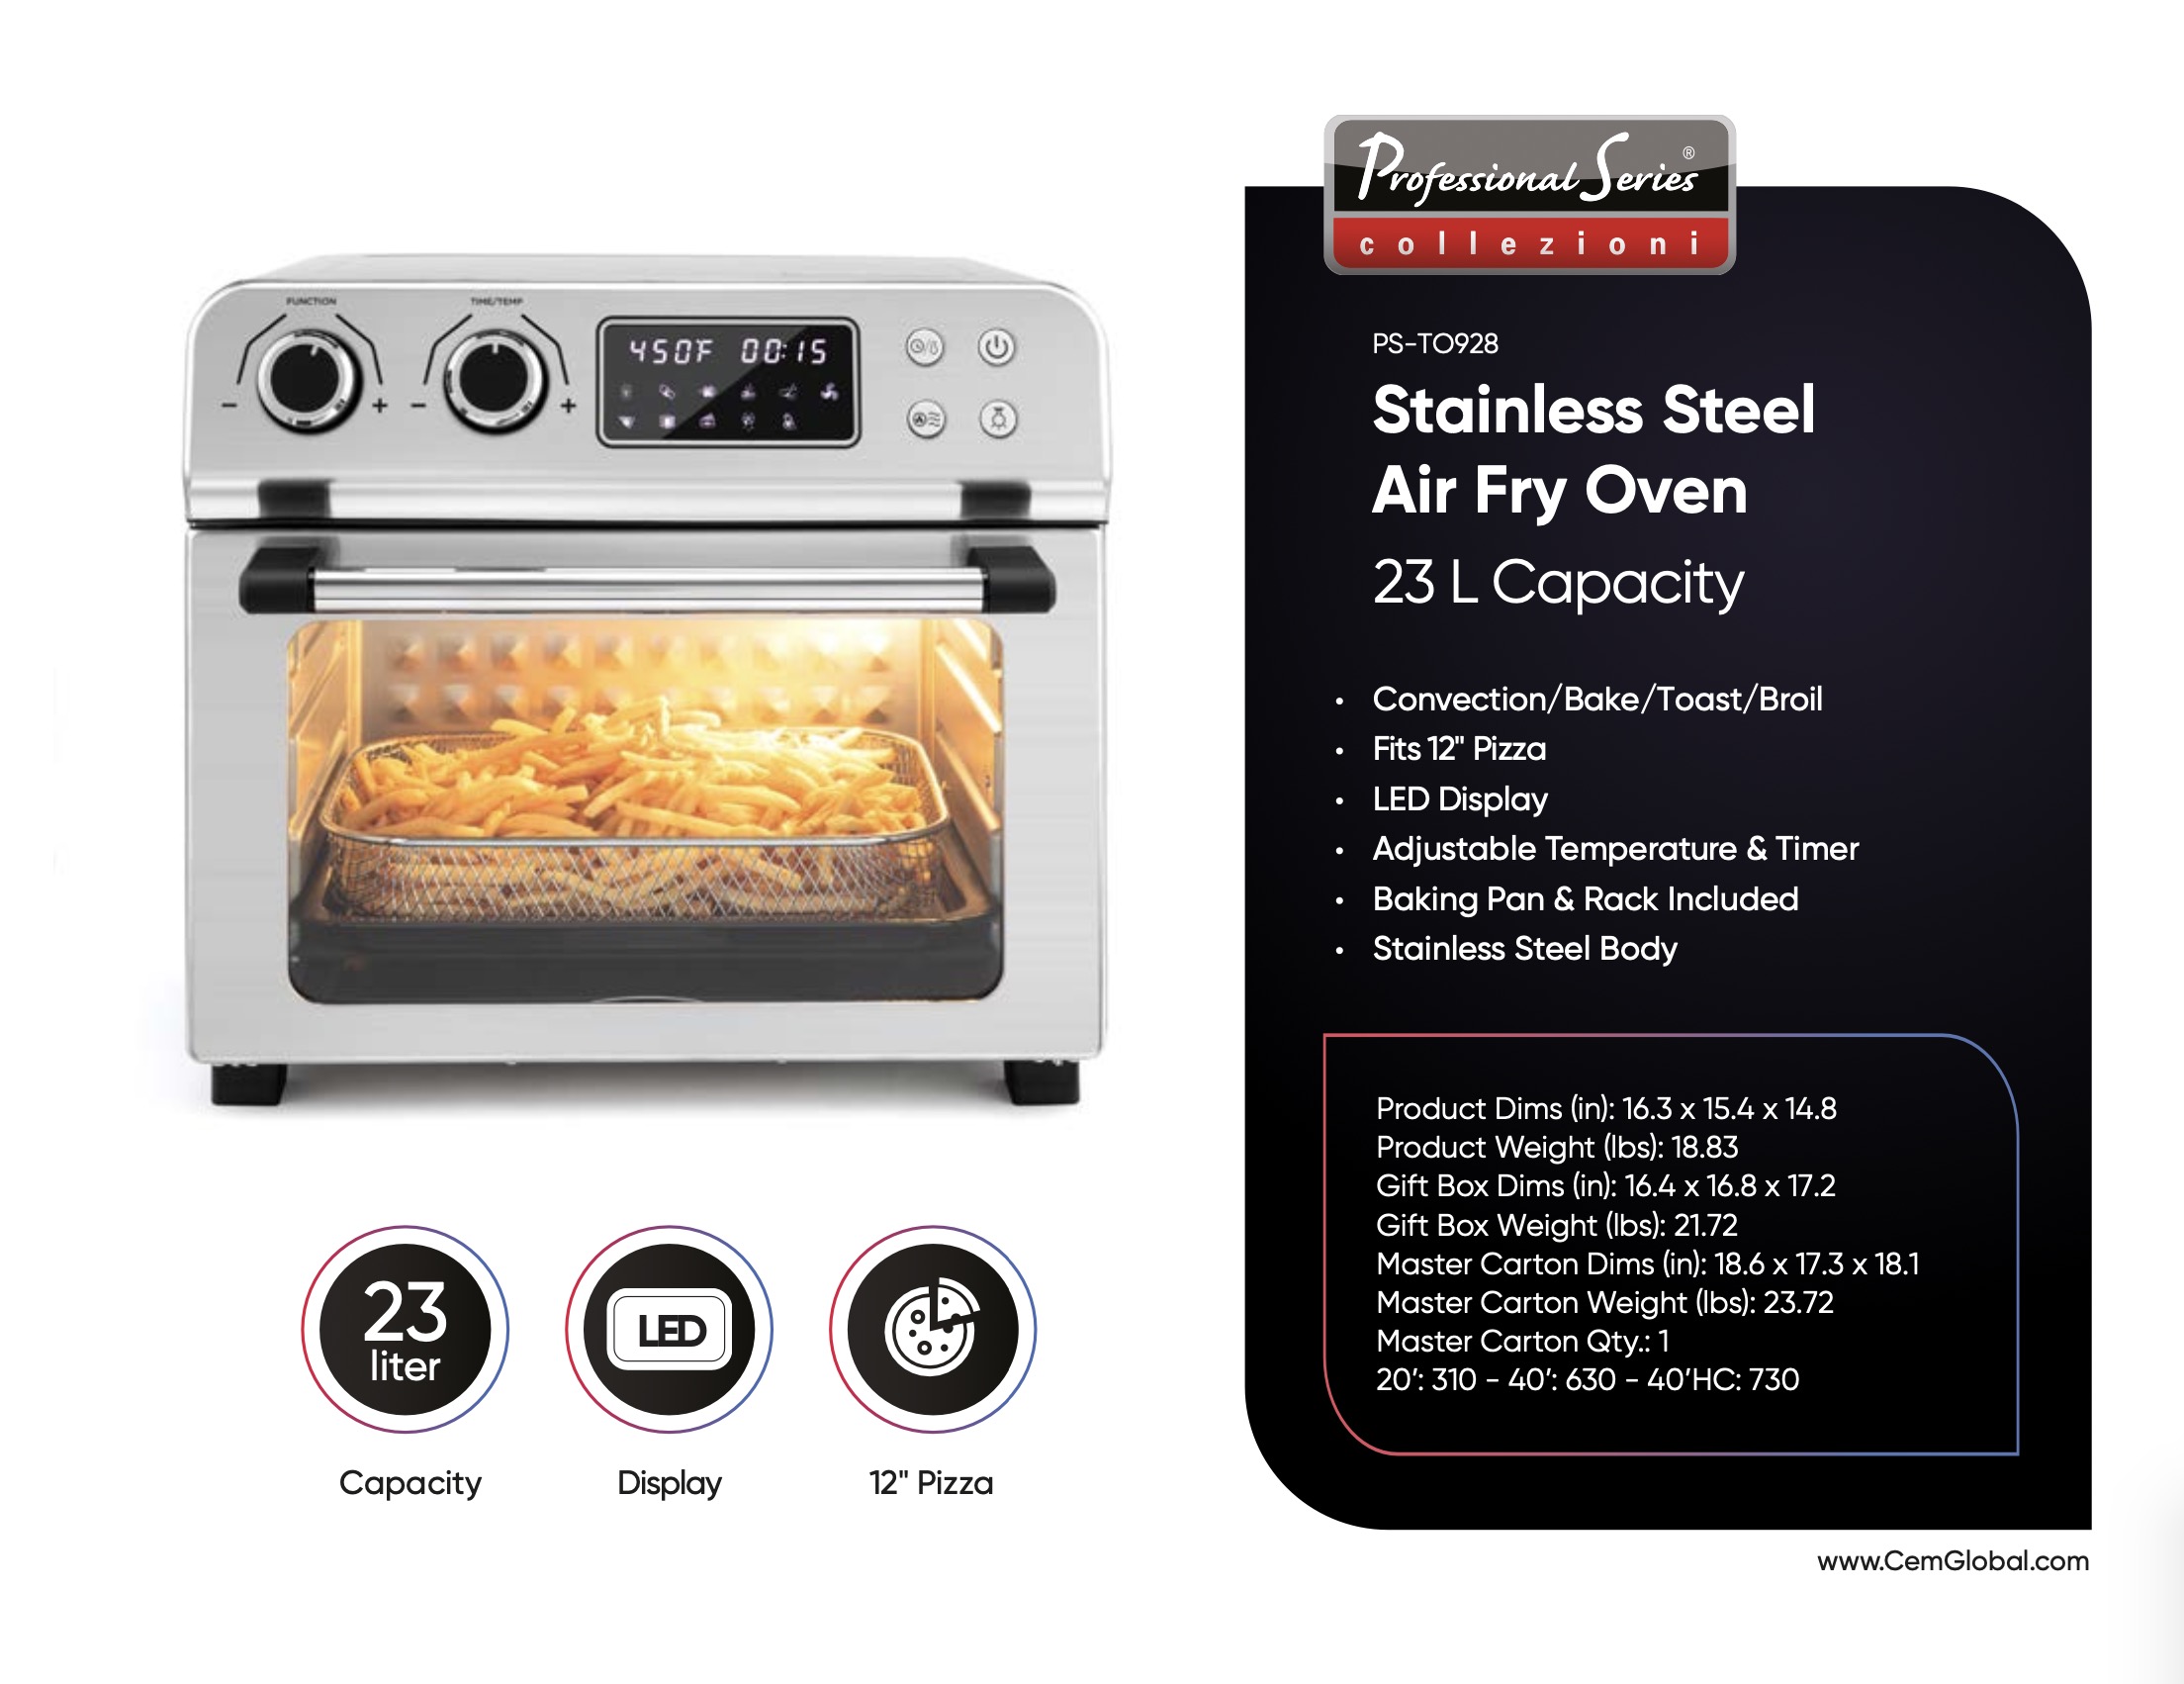 Stainless Steel Air Fry Oven 23 L